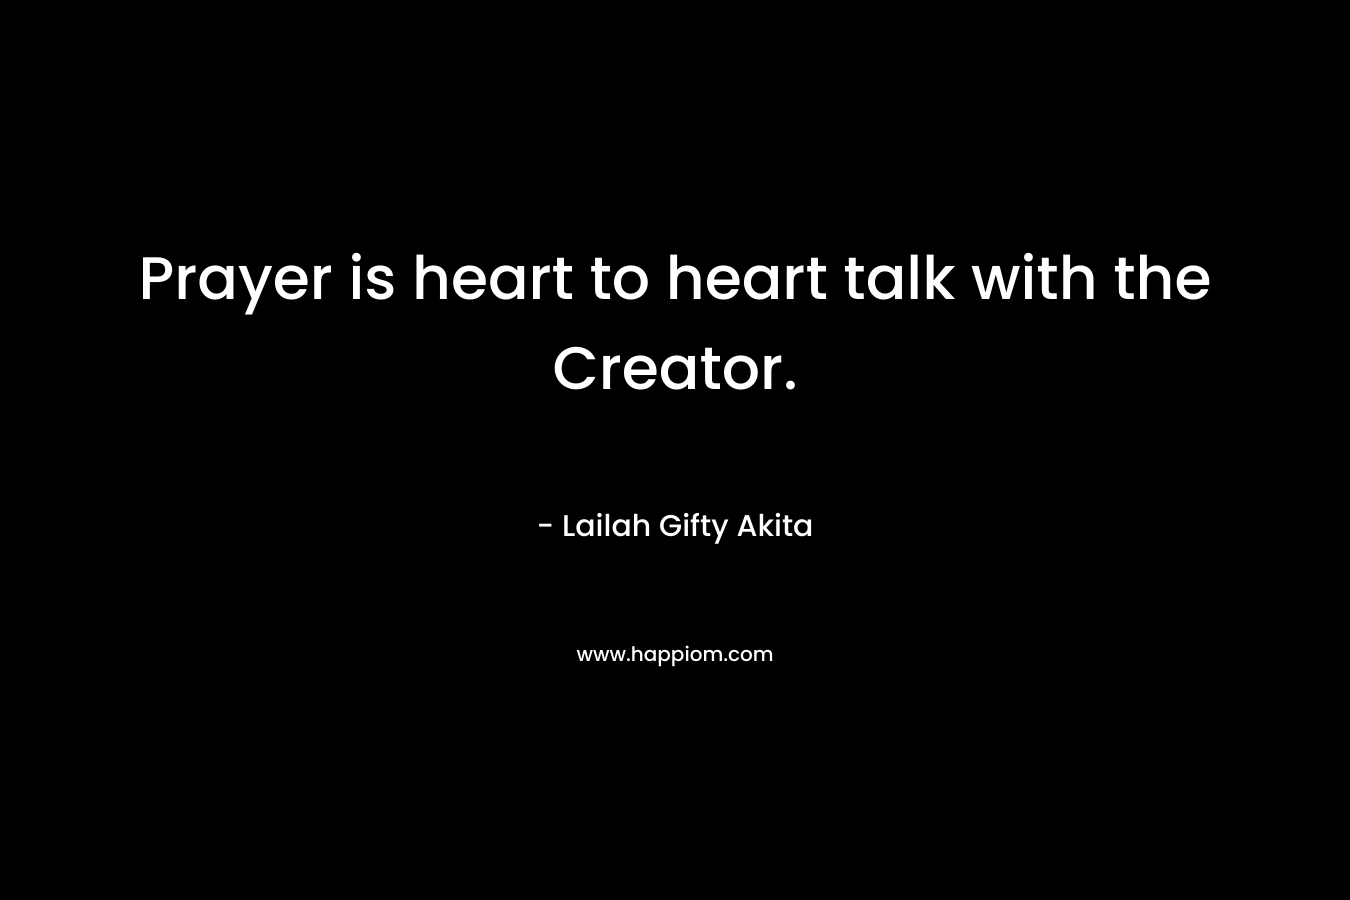 Prayer is heart to heart talk with the Creator.